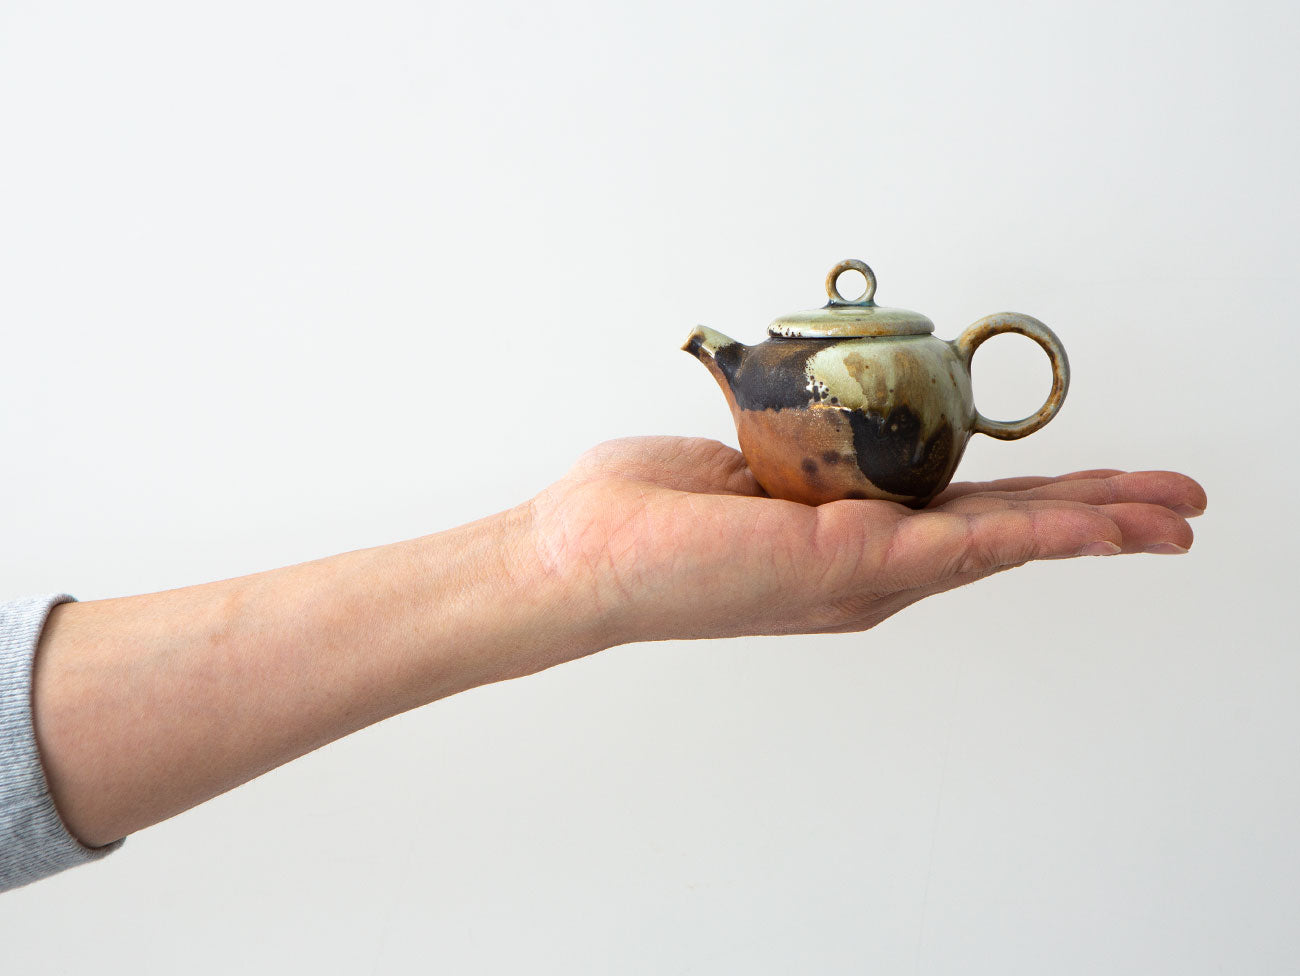 Abstract, Var. 1. Teapot in hand to show relative size.